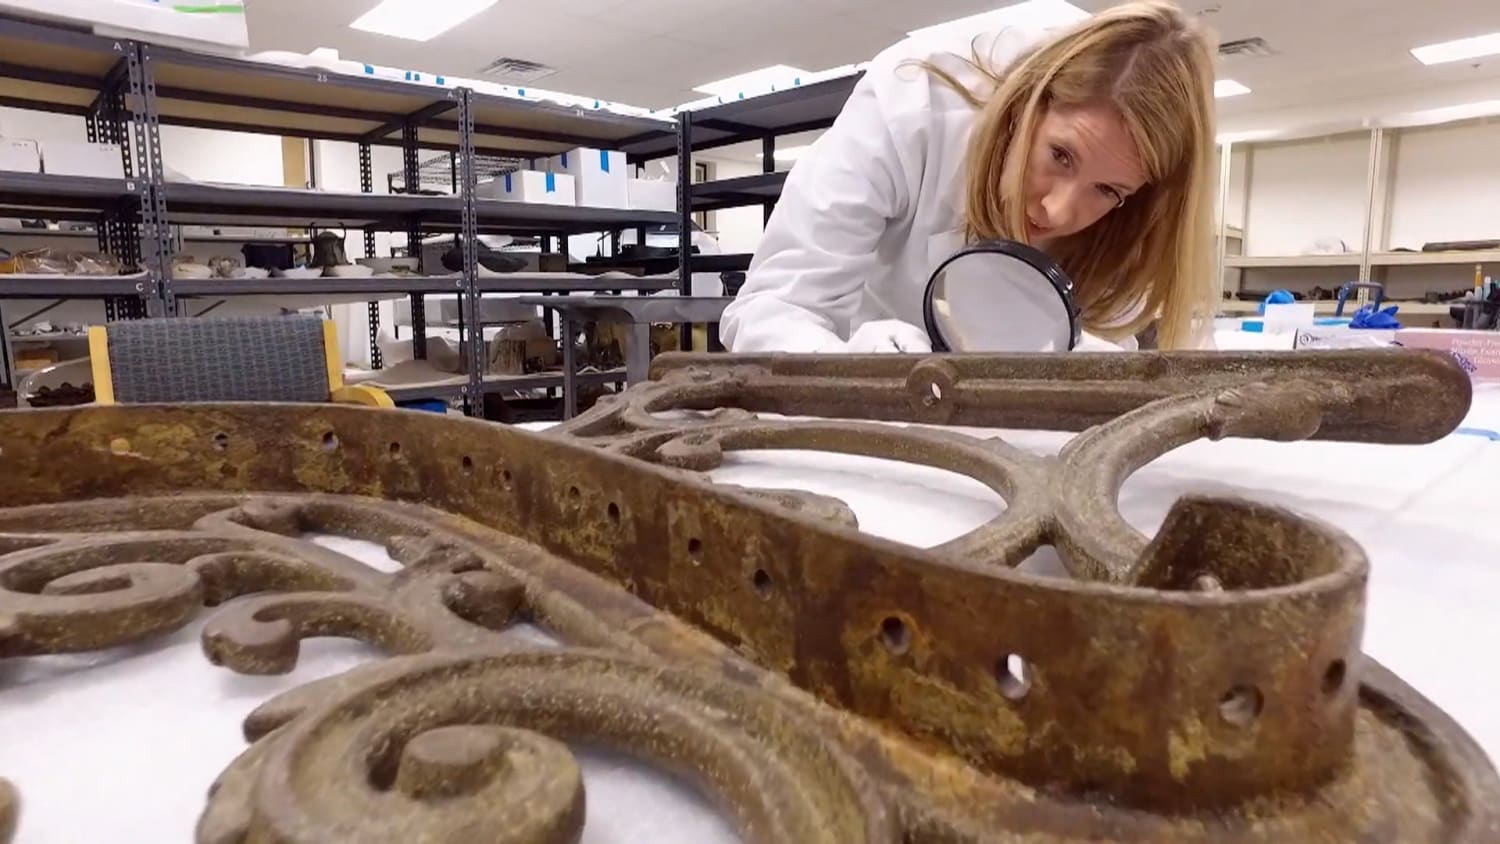 The Titanic is for sale for $200 million: Here's a look at its salvaged  treasures